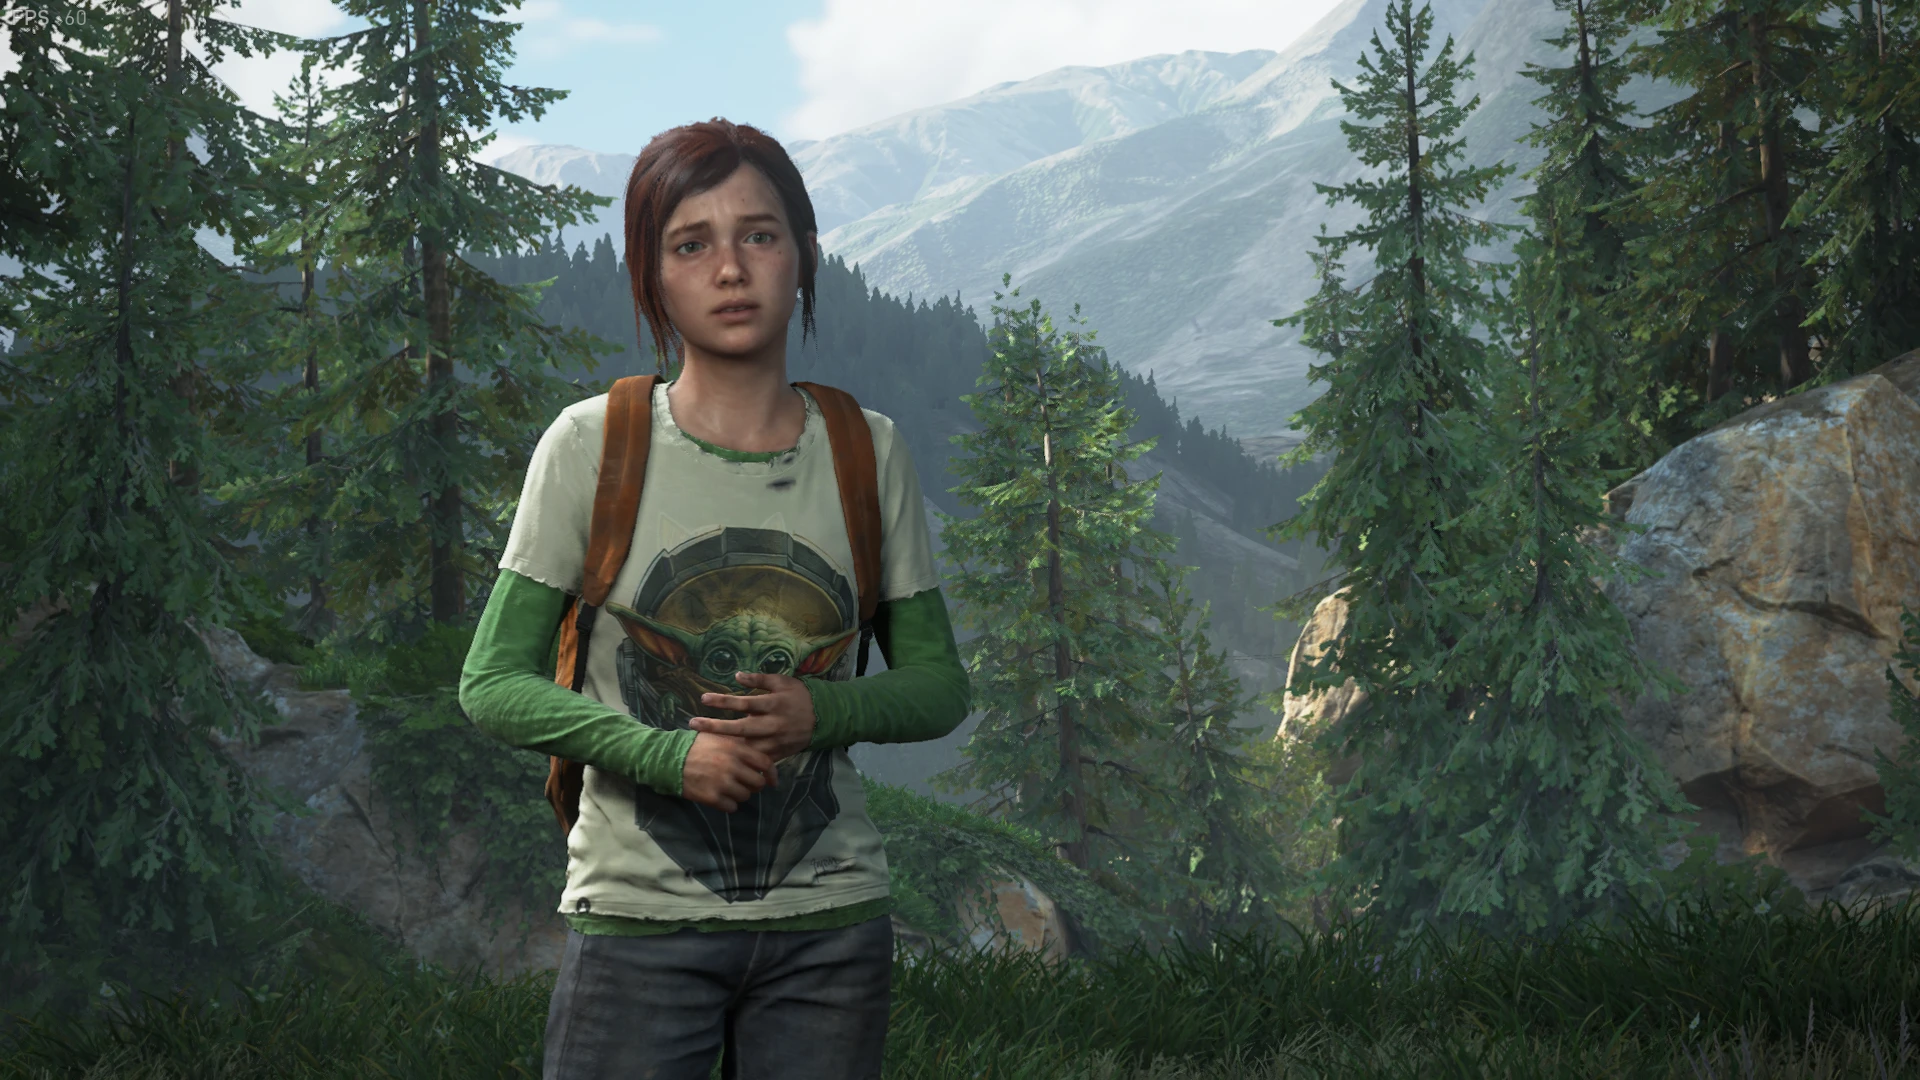 The Last of Us Part 2 Here Are All The Free Themes and Avatars To Download